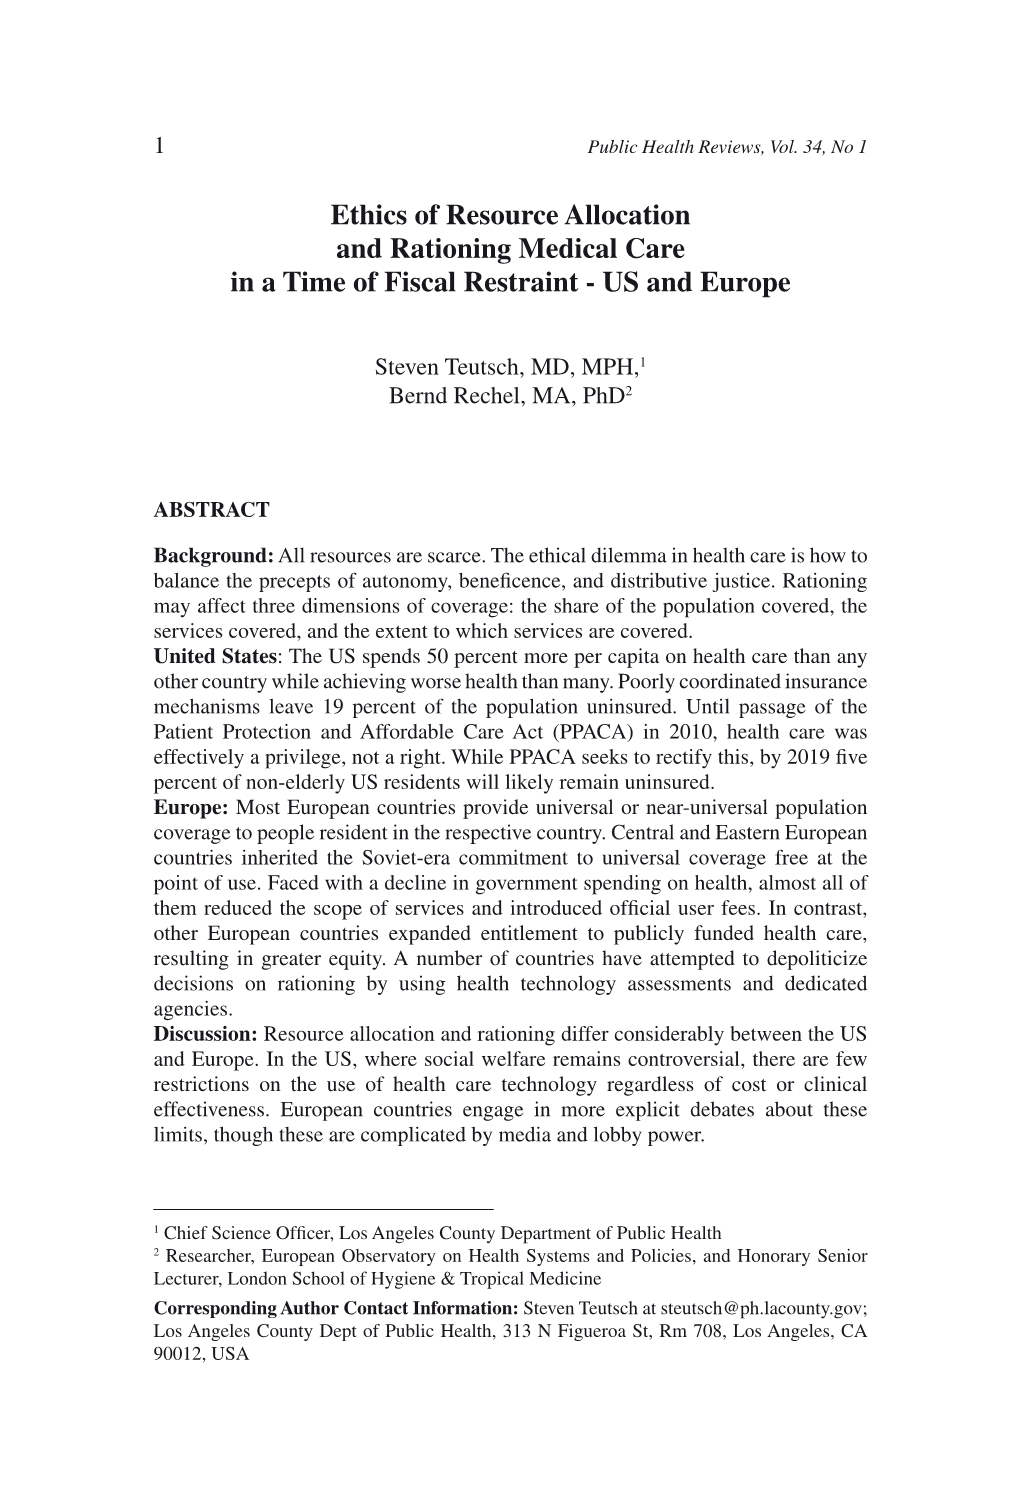 Ethics of Resource Allocation and Rationing Medical Care in a Time of Fiscal Restraint - US and Europe